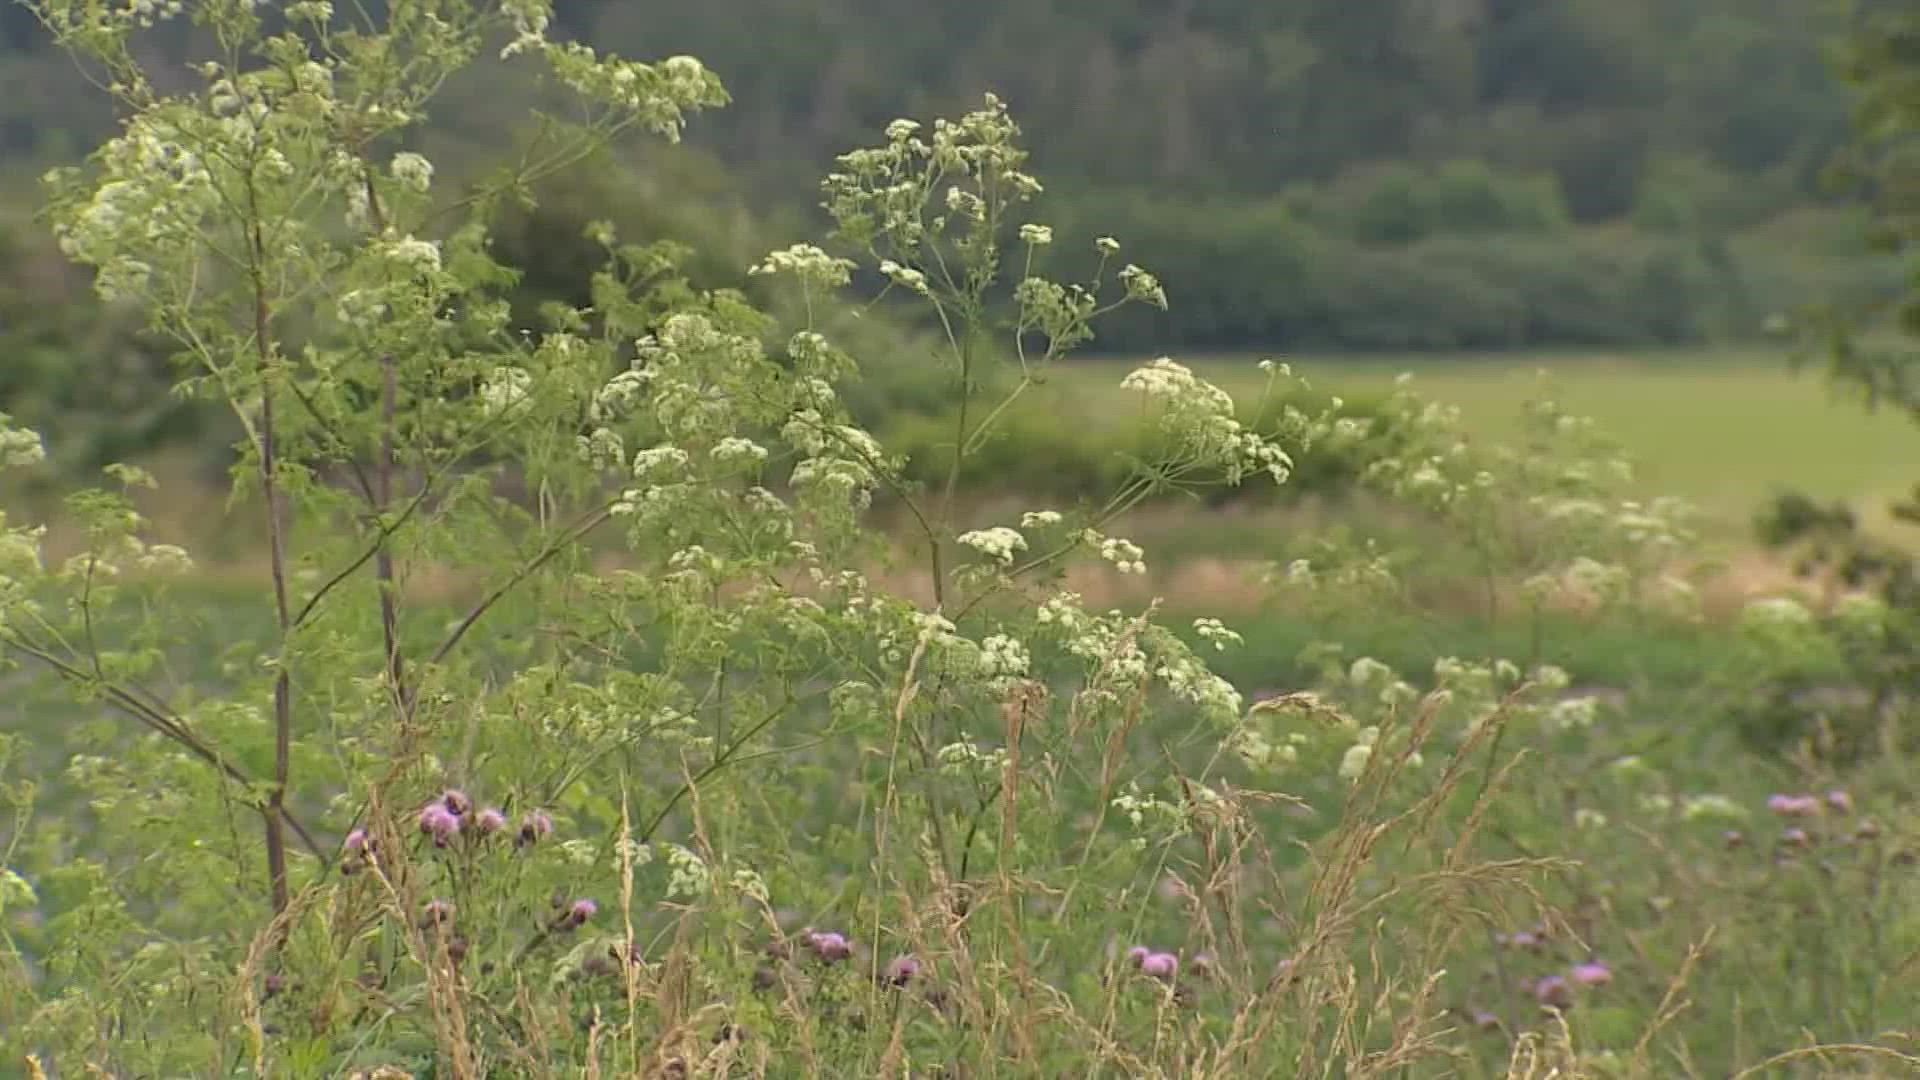 Poison hemlock is lethal, even in small amounts.